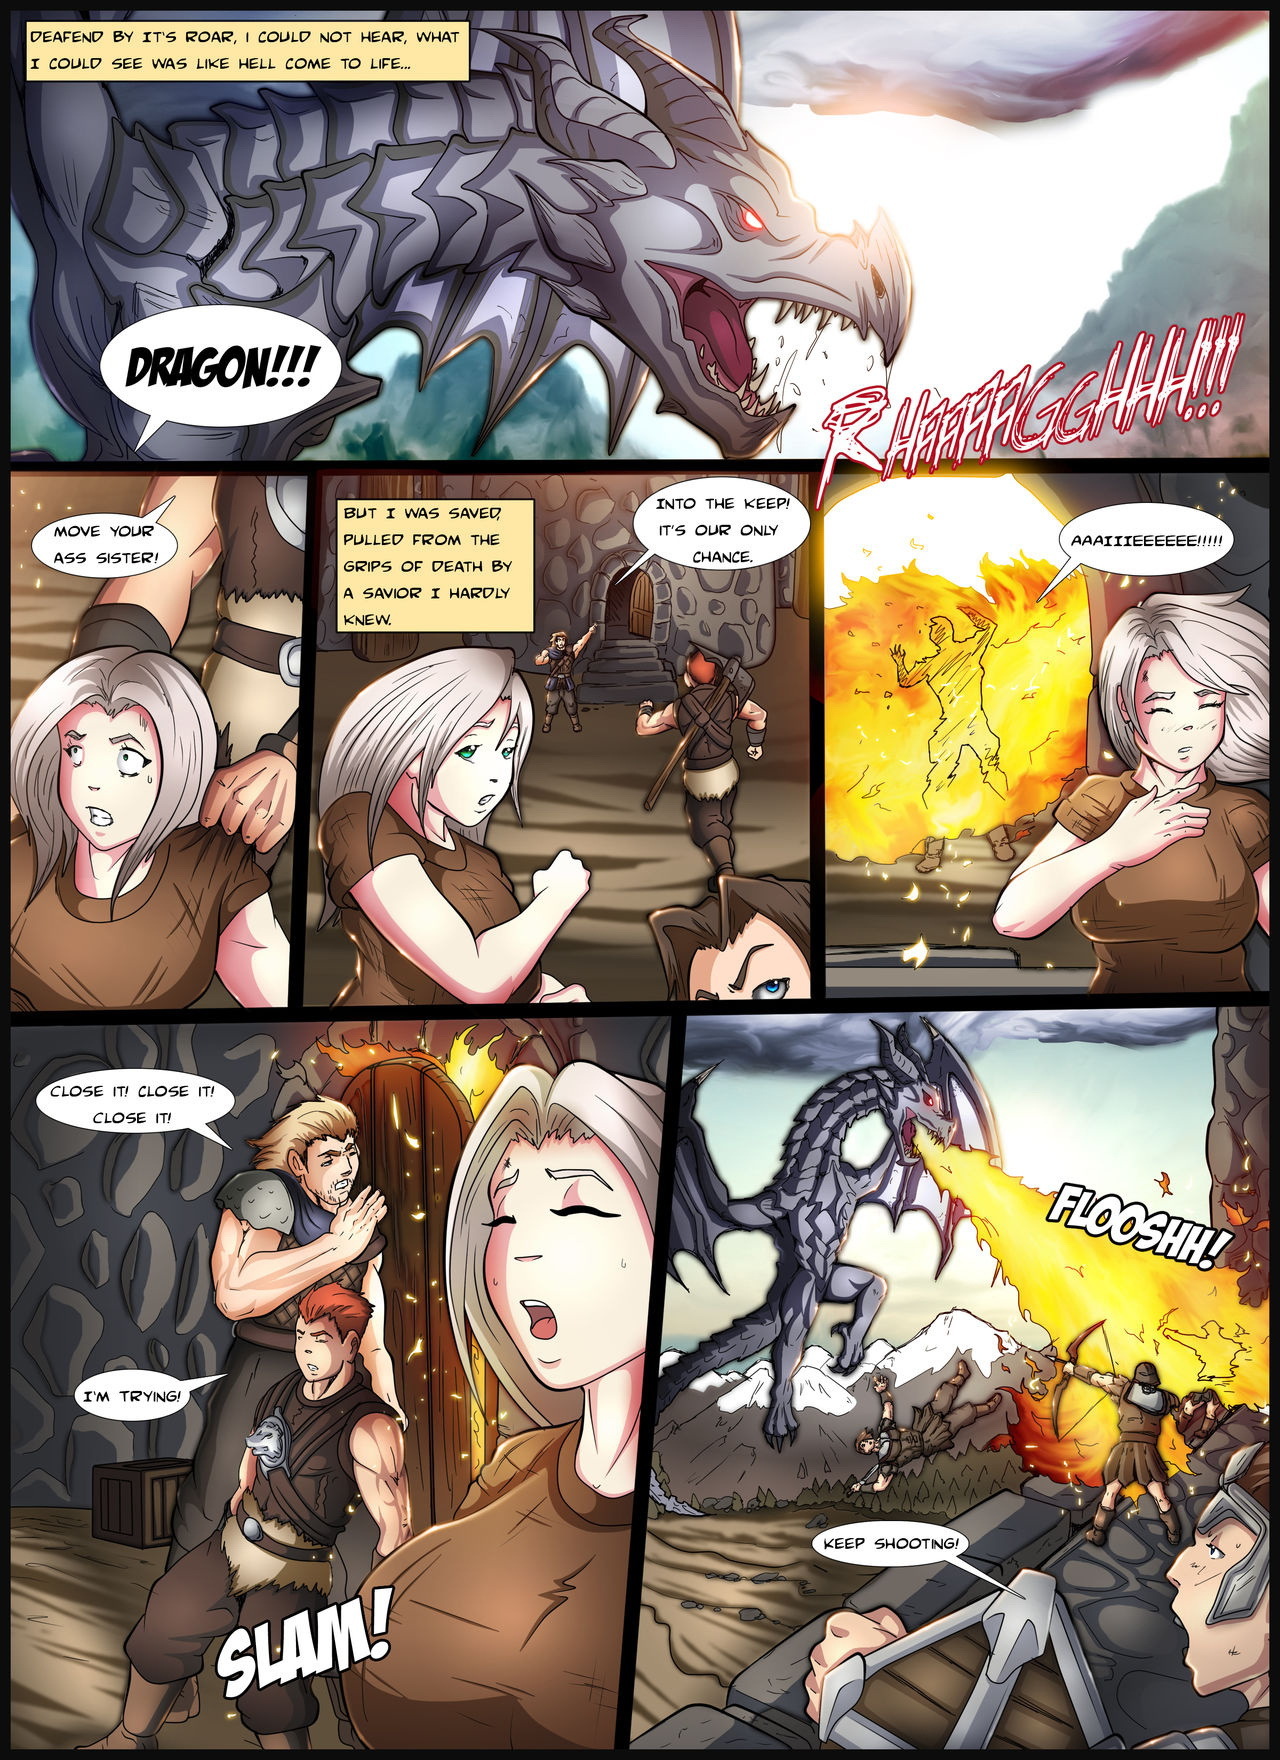 Skyrift #1 - Page 3